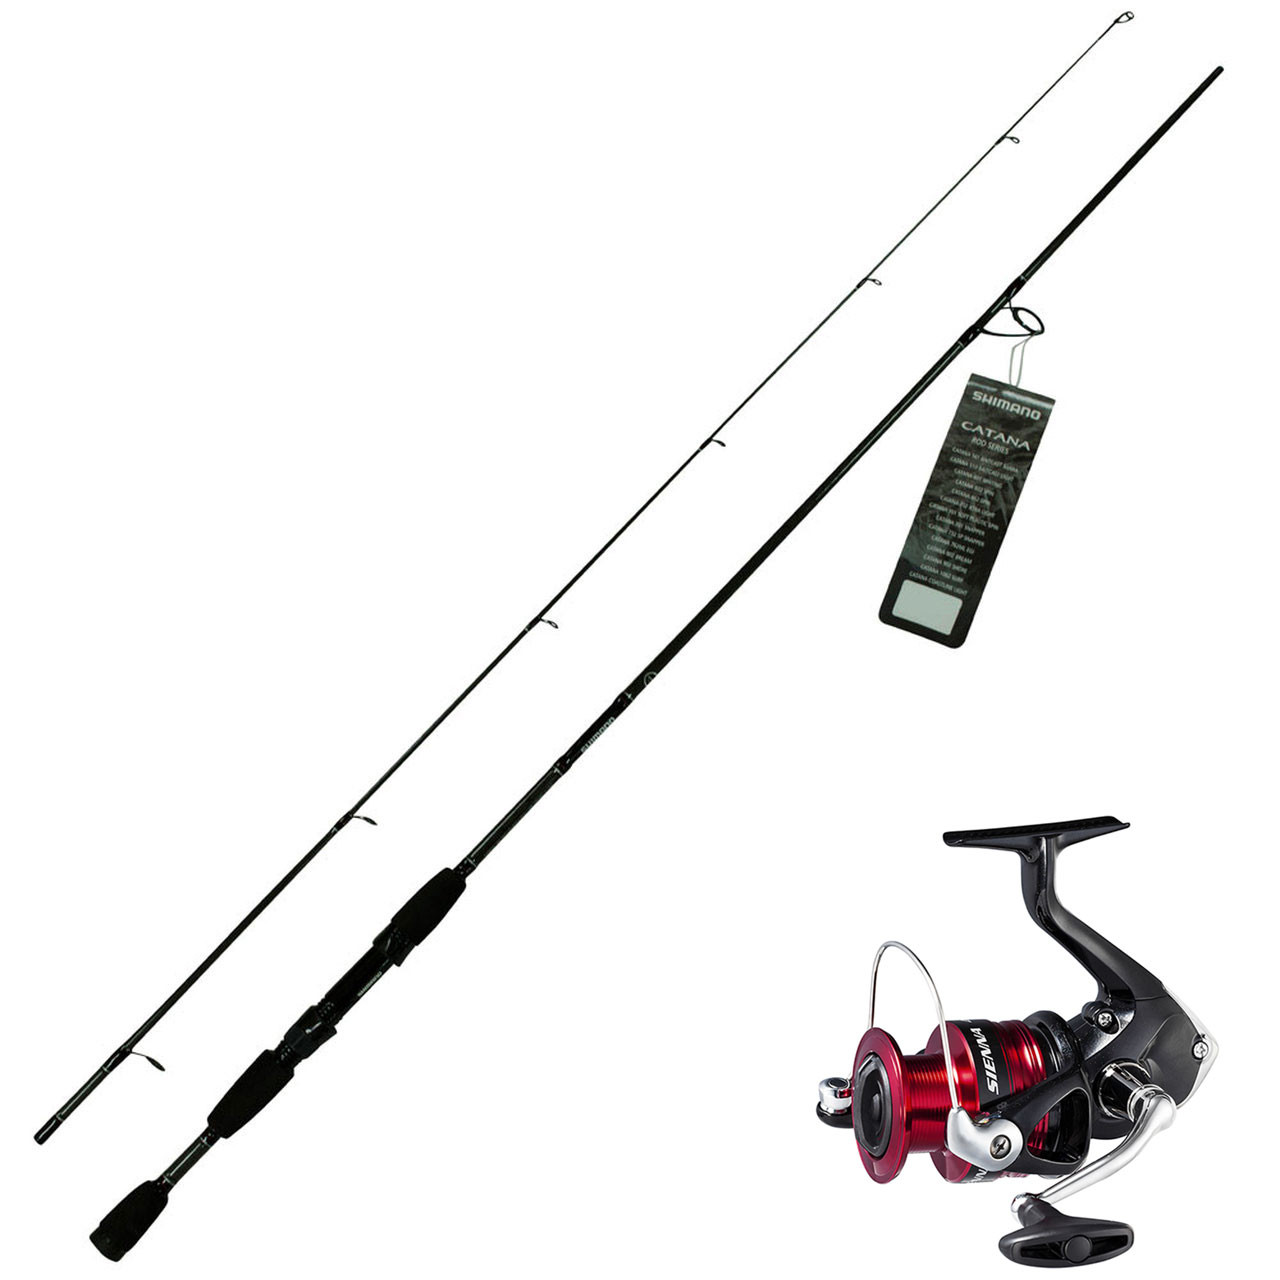 Unique Style Shimano Catana 732 Snapper Fishing Rod with Shimano